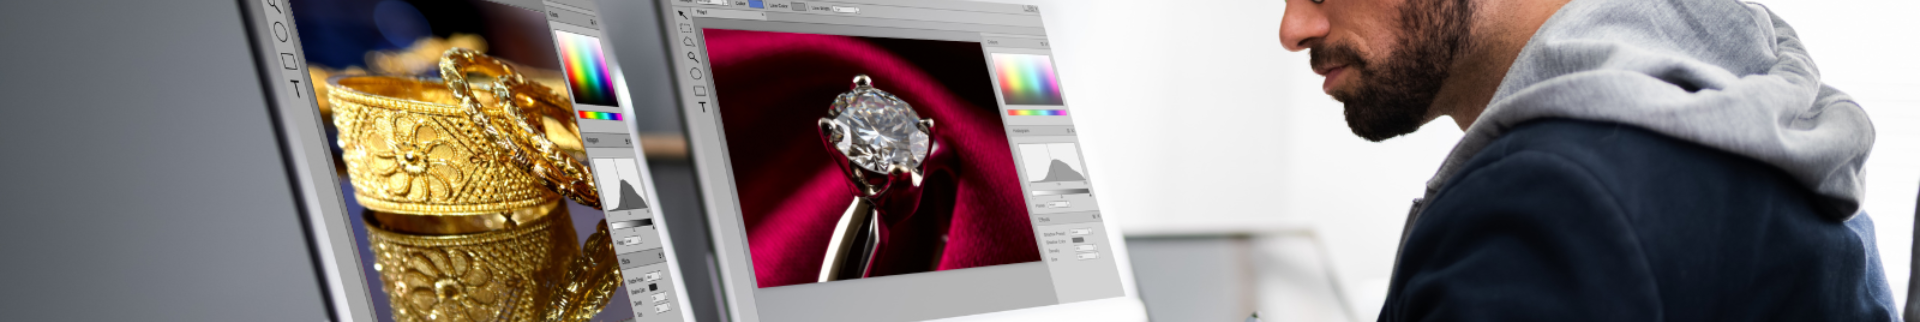 Jewelry Photo Editing Retouching Services|Starting at $1/Image